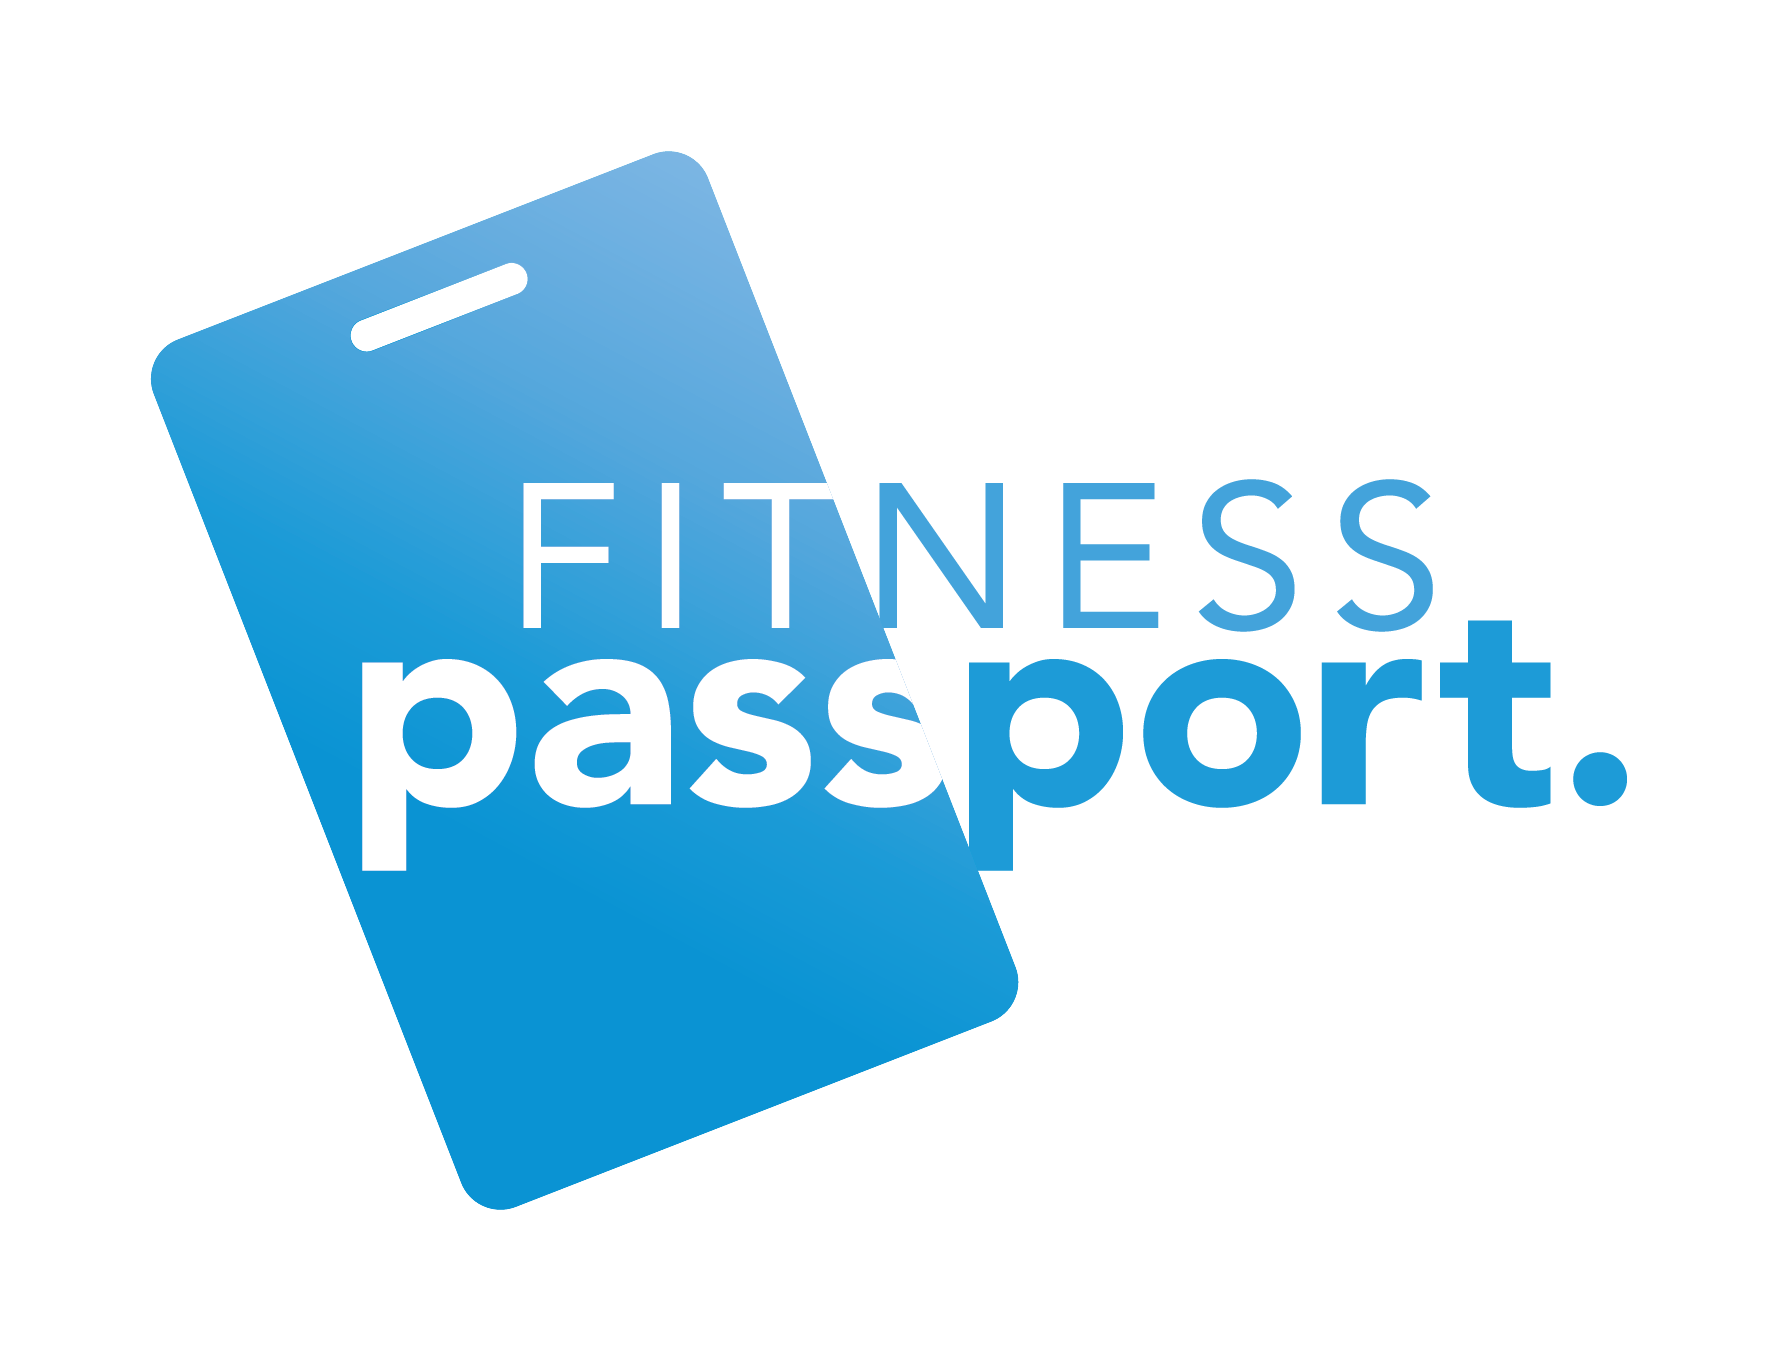 Fitness passport accepted